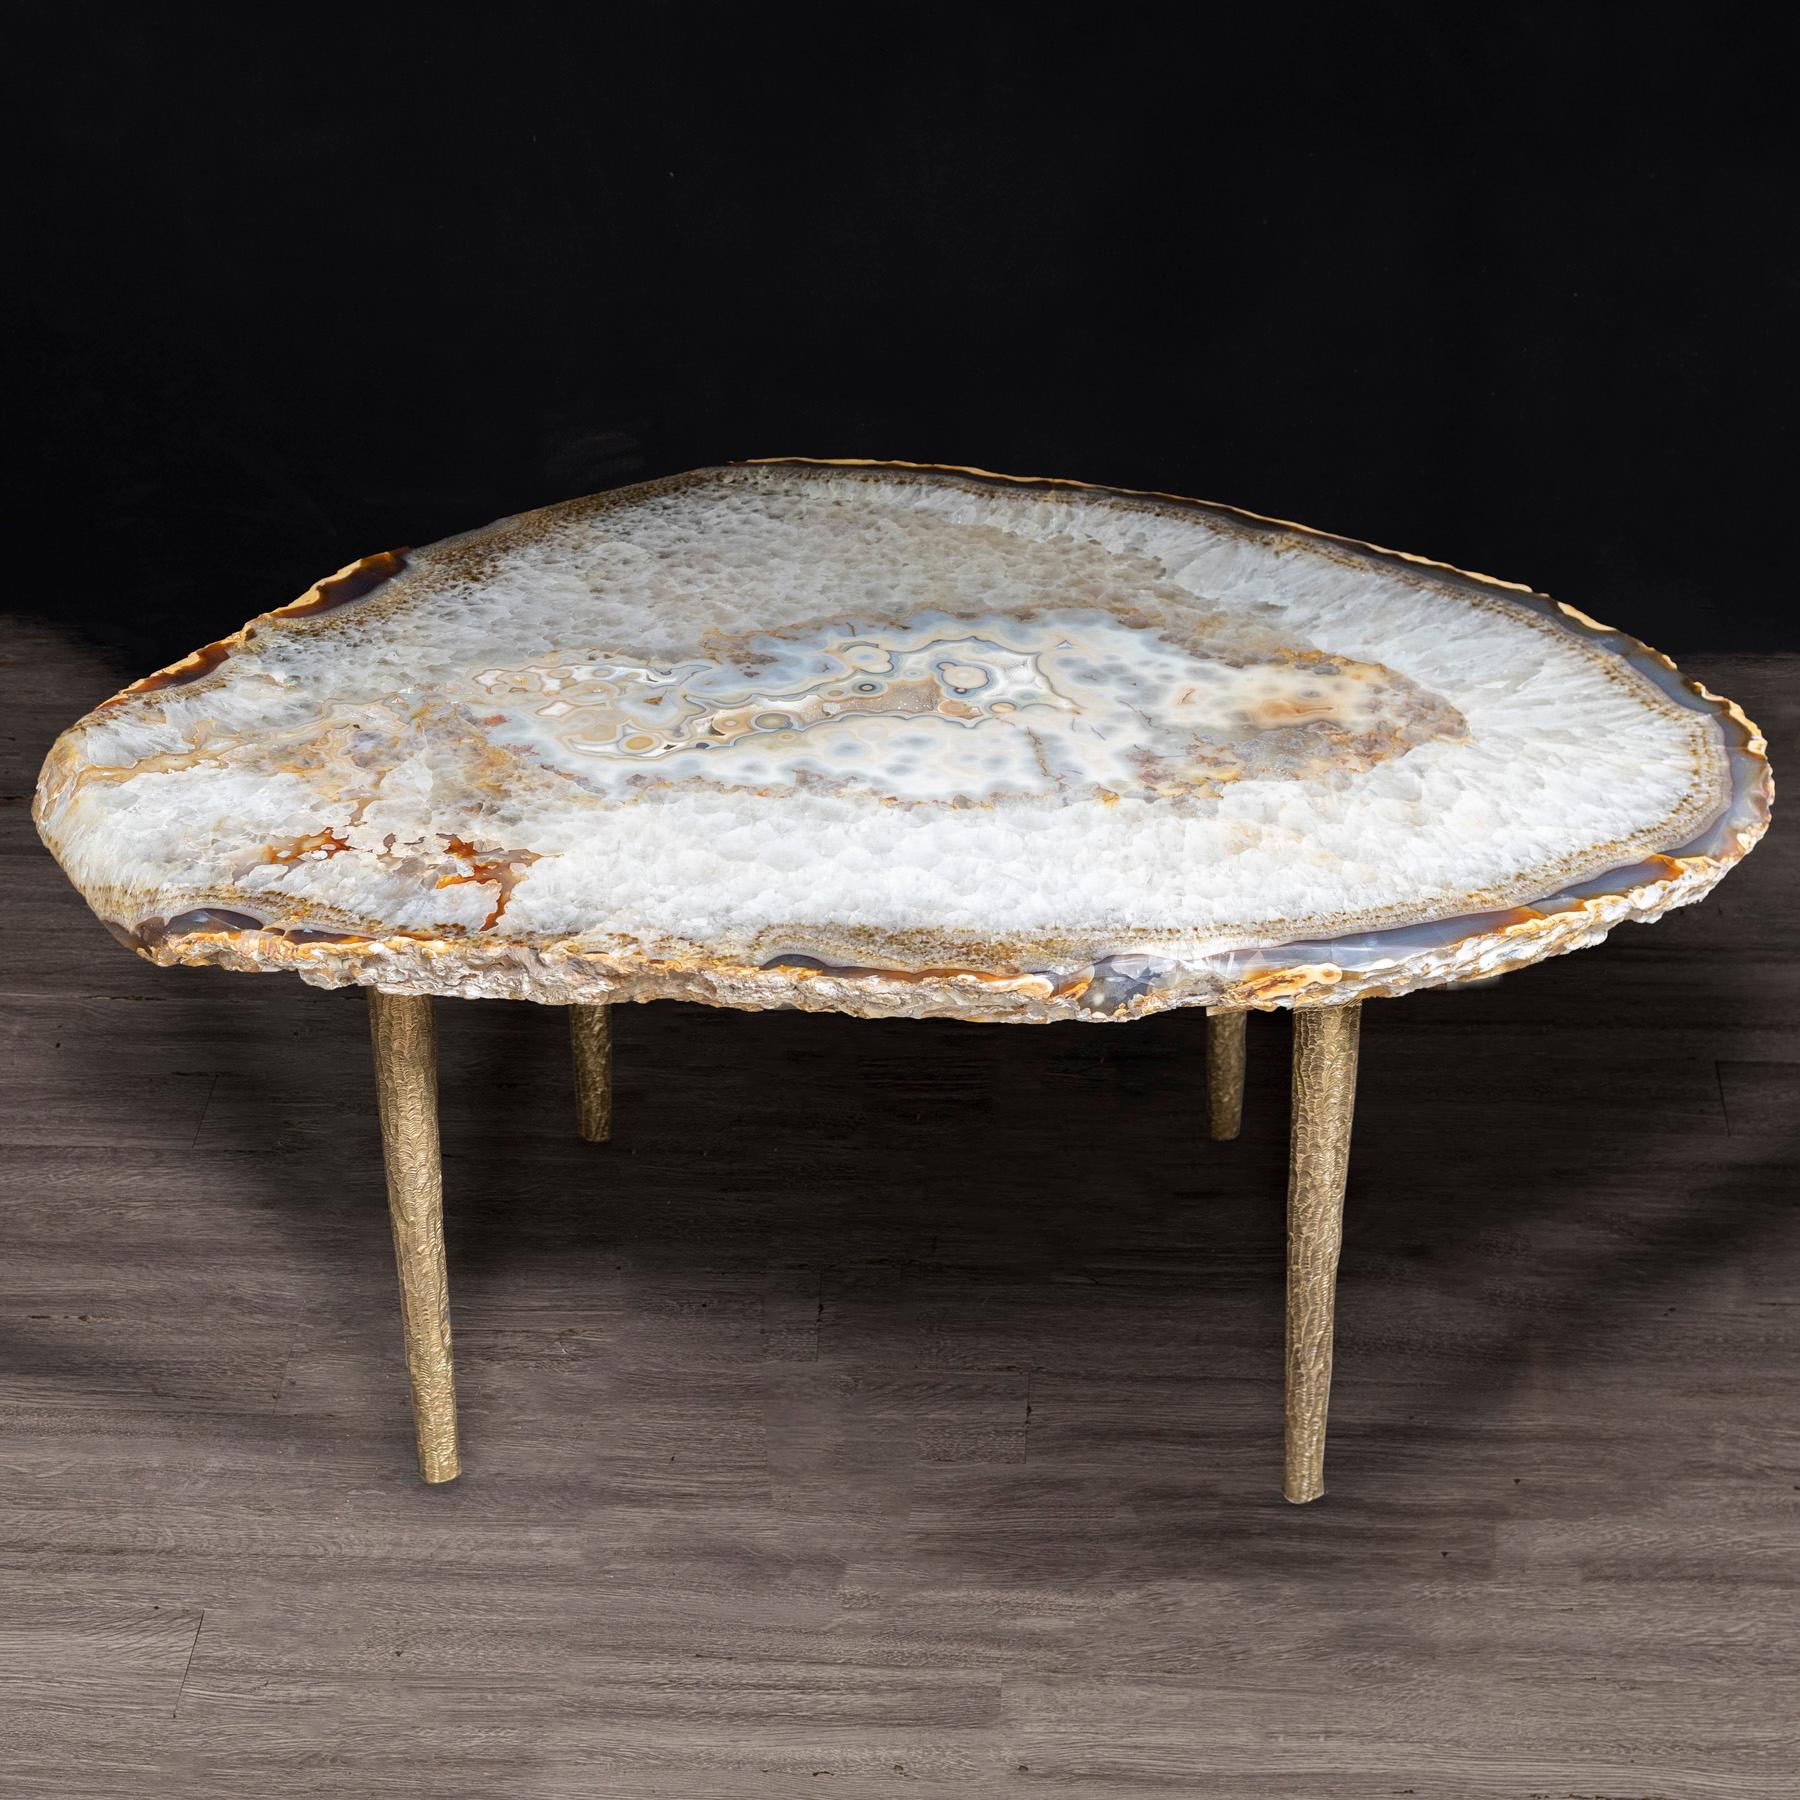 This agate slab forming a side table or cocktail table, is from Brazil and has a combination of colors with hints of blue and gold. Agates are formed in rounded nodules, which are sliced open to bring out the internal pattern hidden in the stone.